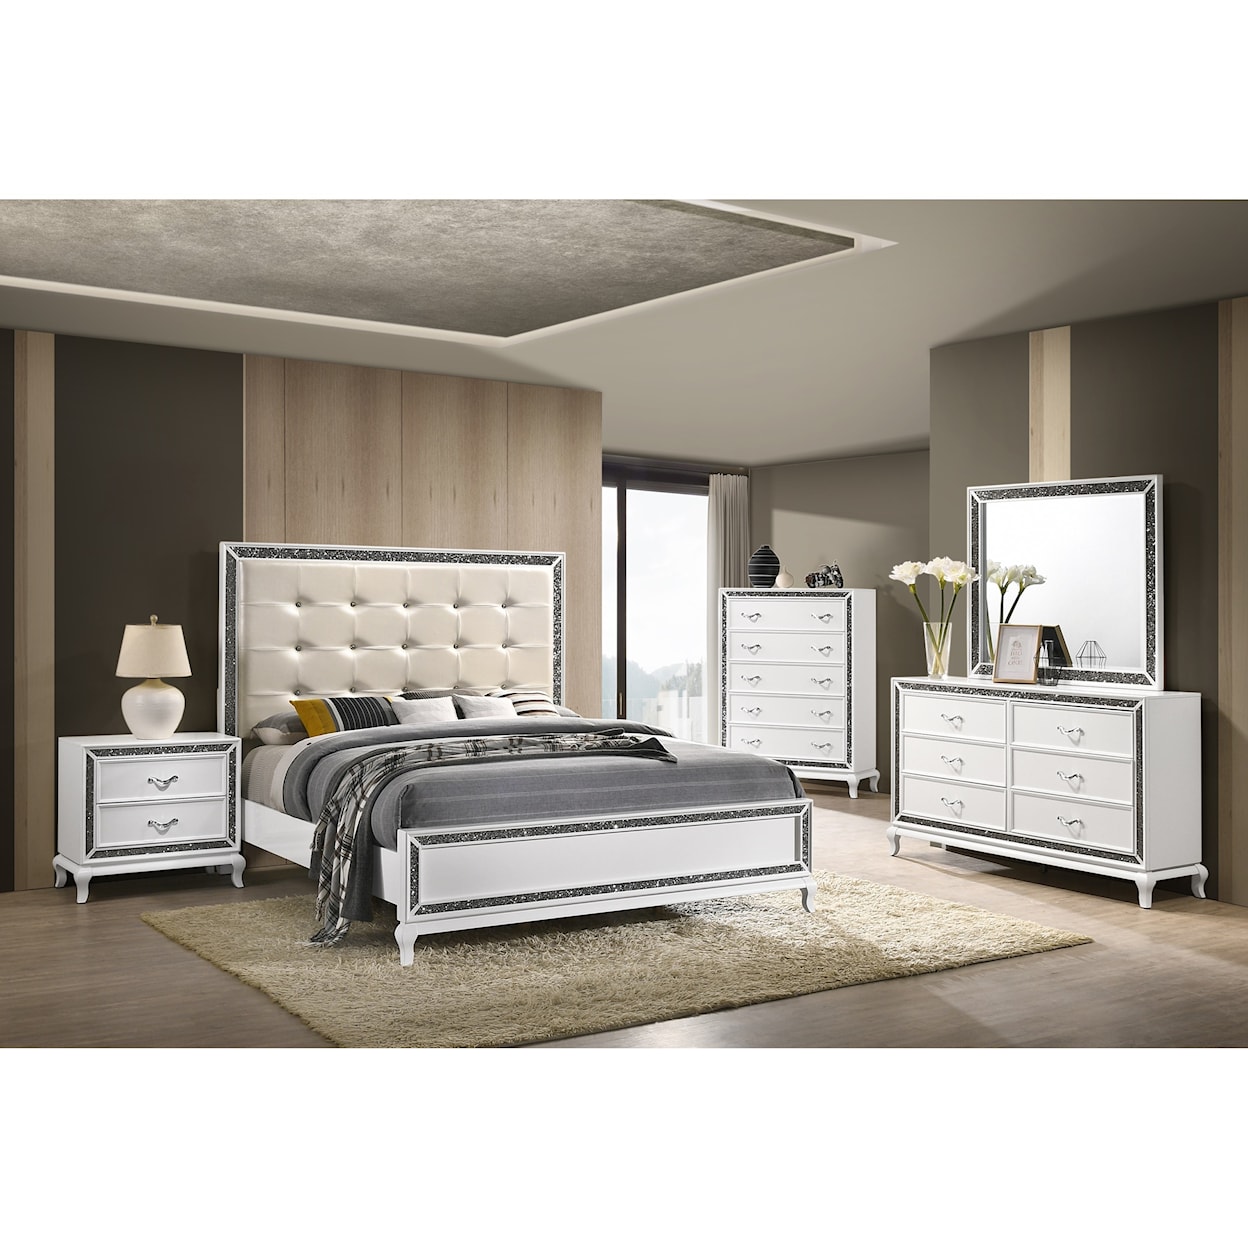 New Classic Furniture Park Imperial King Bedroom Group